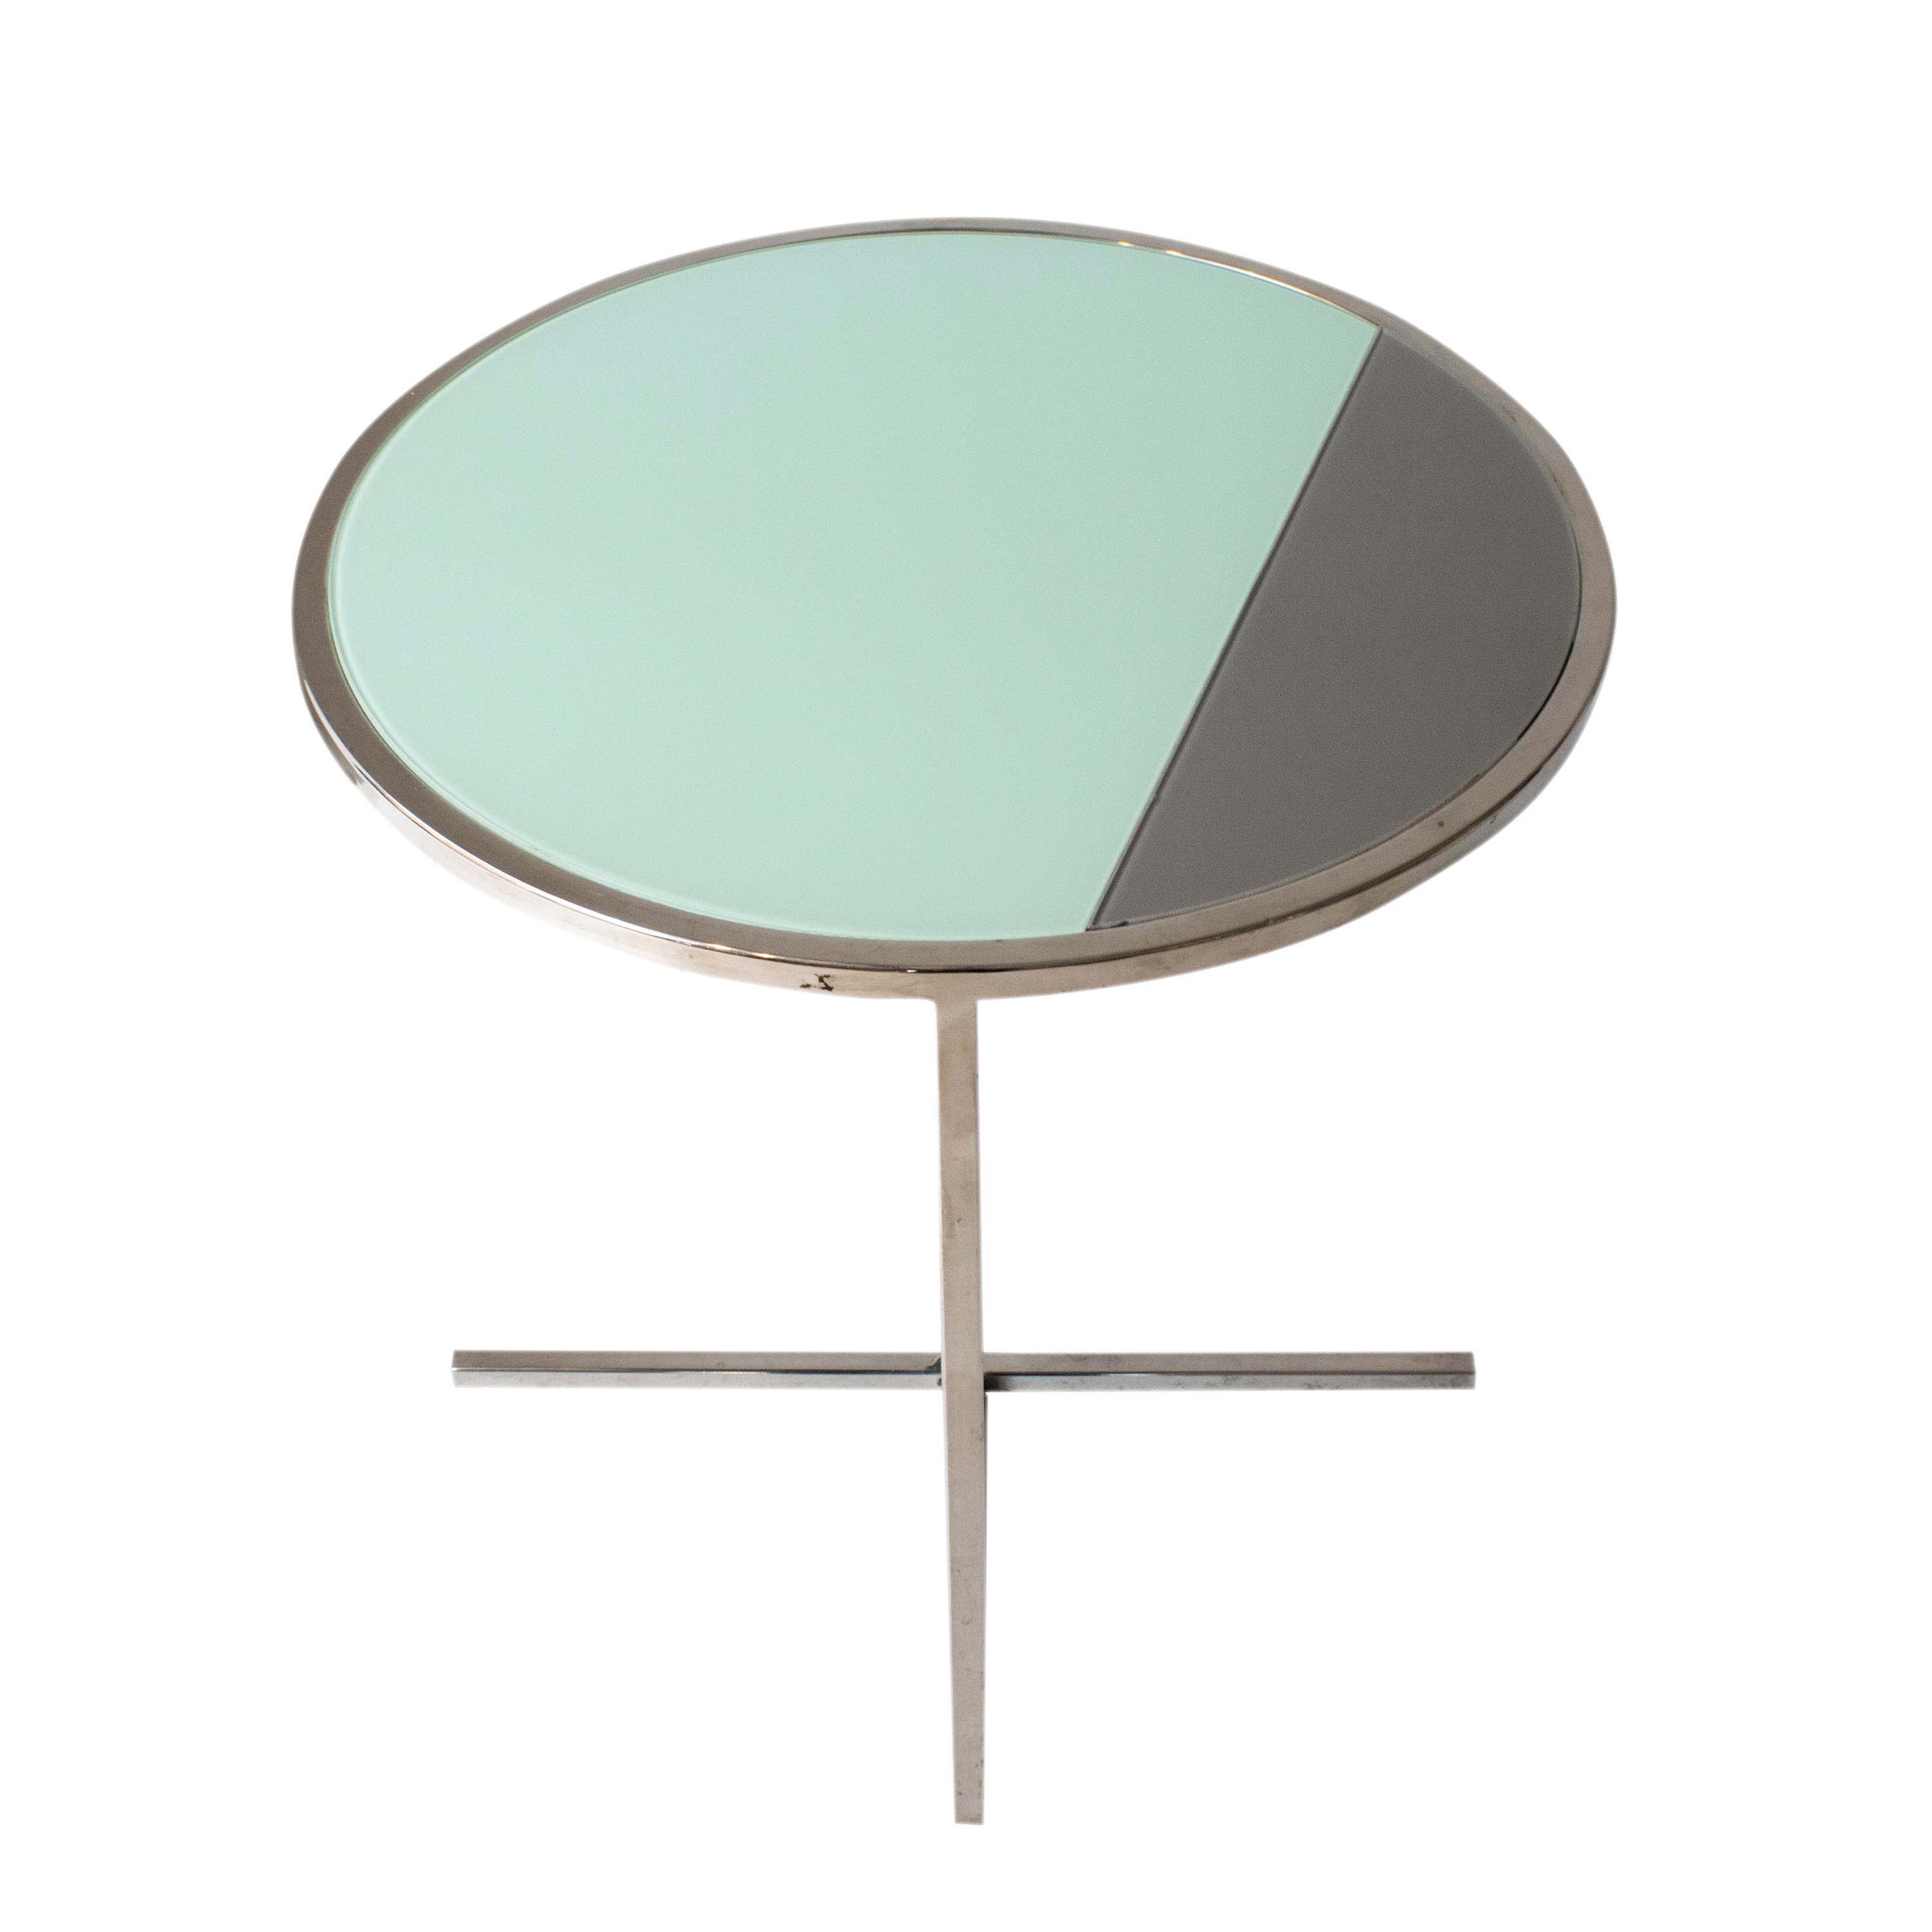 Post-Modern Contemporary Chromed Steel Green and Grey Glass Round Center Table, Italy, 1970 For Sale